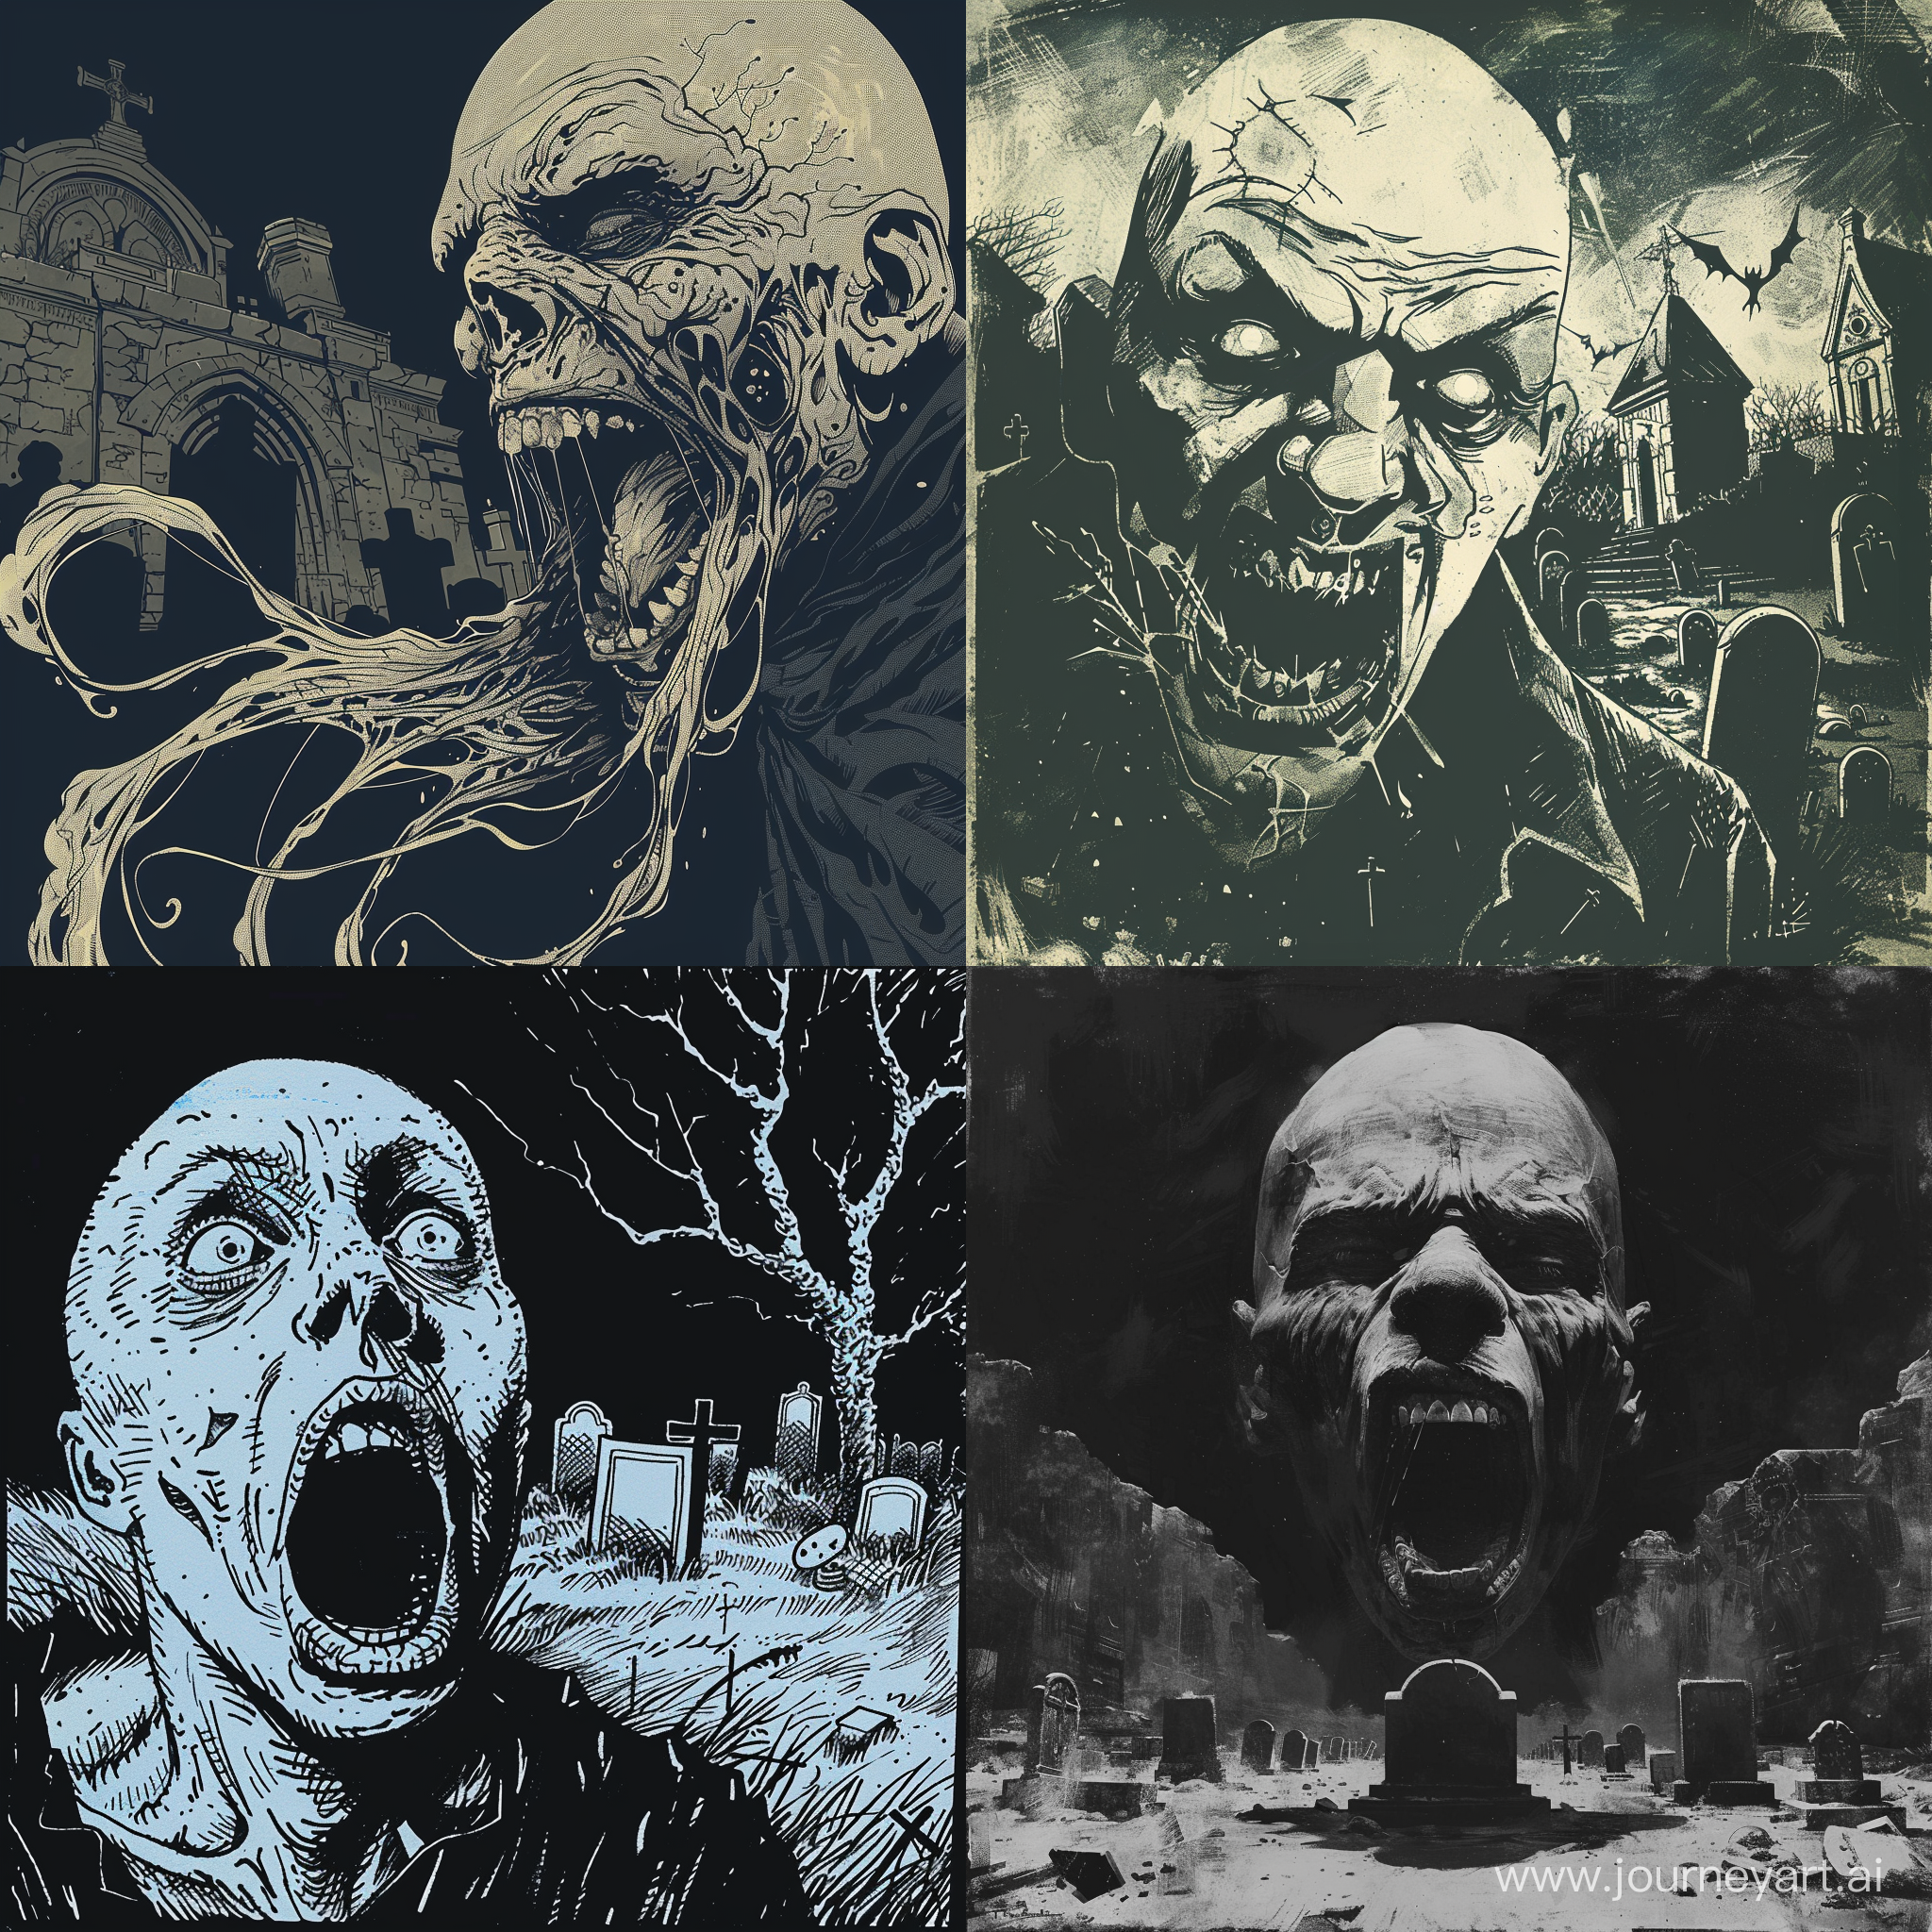 A haunting and macabre illustration of a bald man with a distorted face and a menacingly large, terrifying mouth, set against the backdrop of a dark and eerie graveyard. The image should be in a square format, with a sharp focus on the man's frightening features. The style should be reminiscent of dark and gothic illustrations, with deep shadows and a foreboding atmosphere. Emphasize a high level of detail and intricate linework, creating an image that is both disturbing and captivating. --s 150 --ar 1:1 --c 15